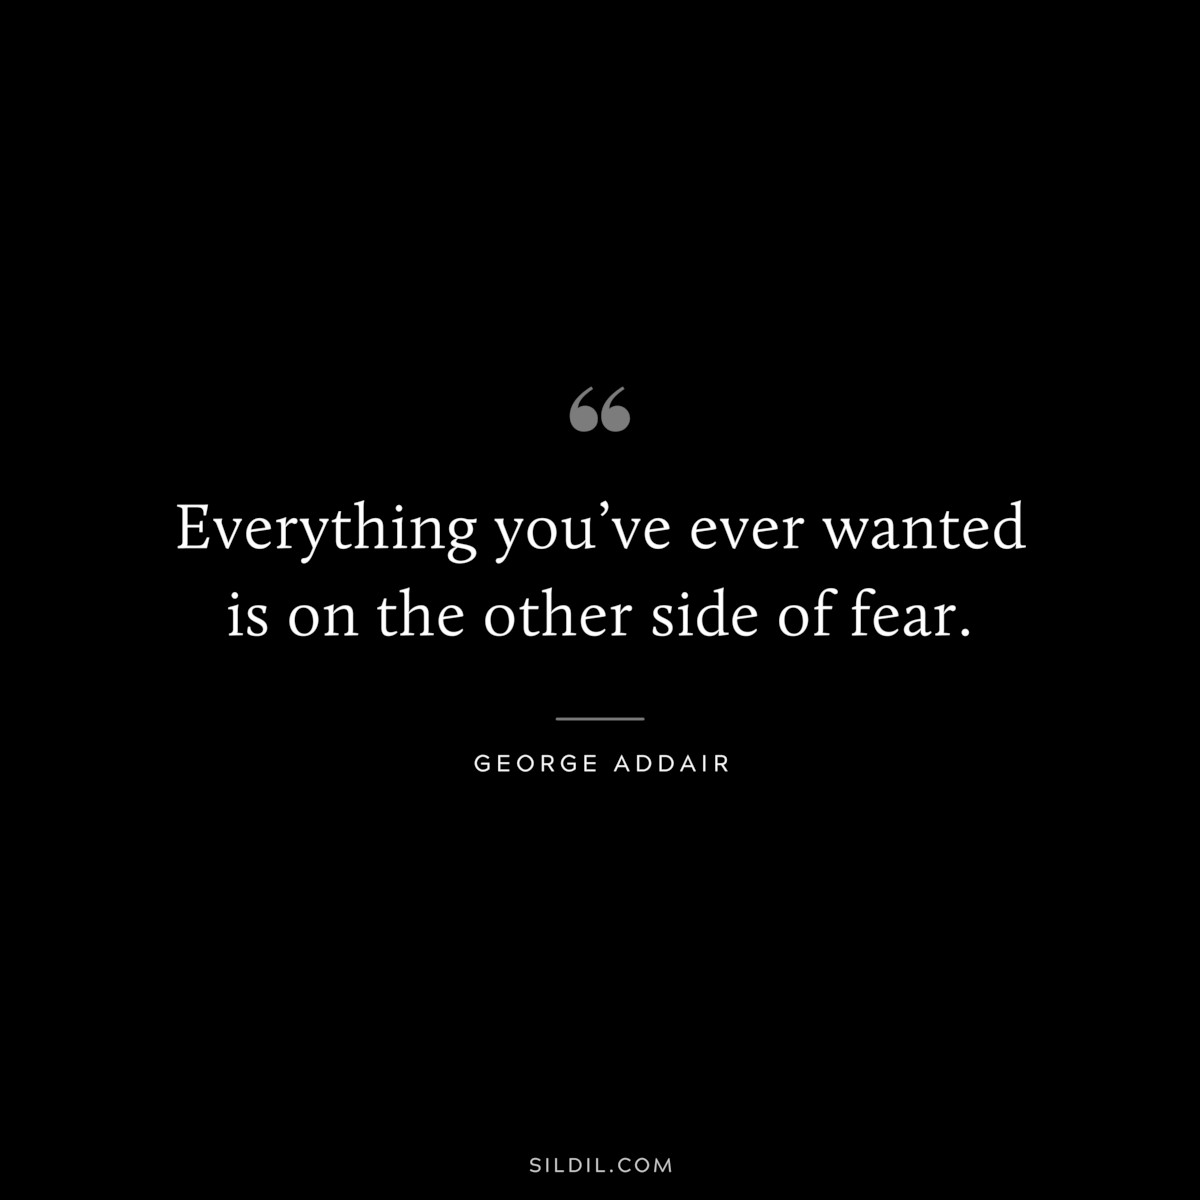 Everything you’ve ever wanted is on the other side of fear. ― George Addair